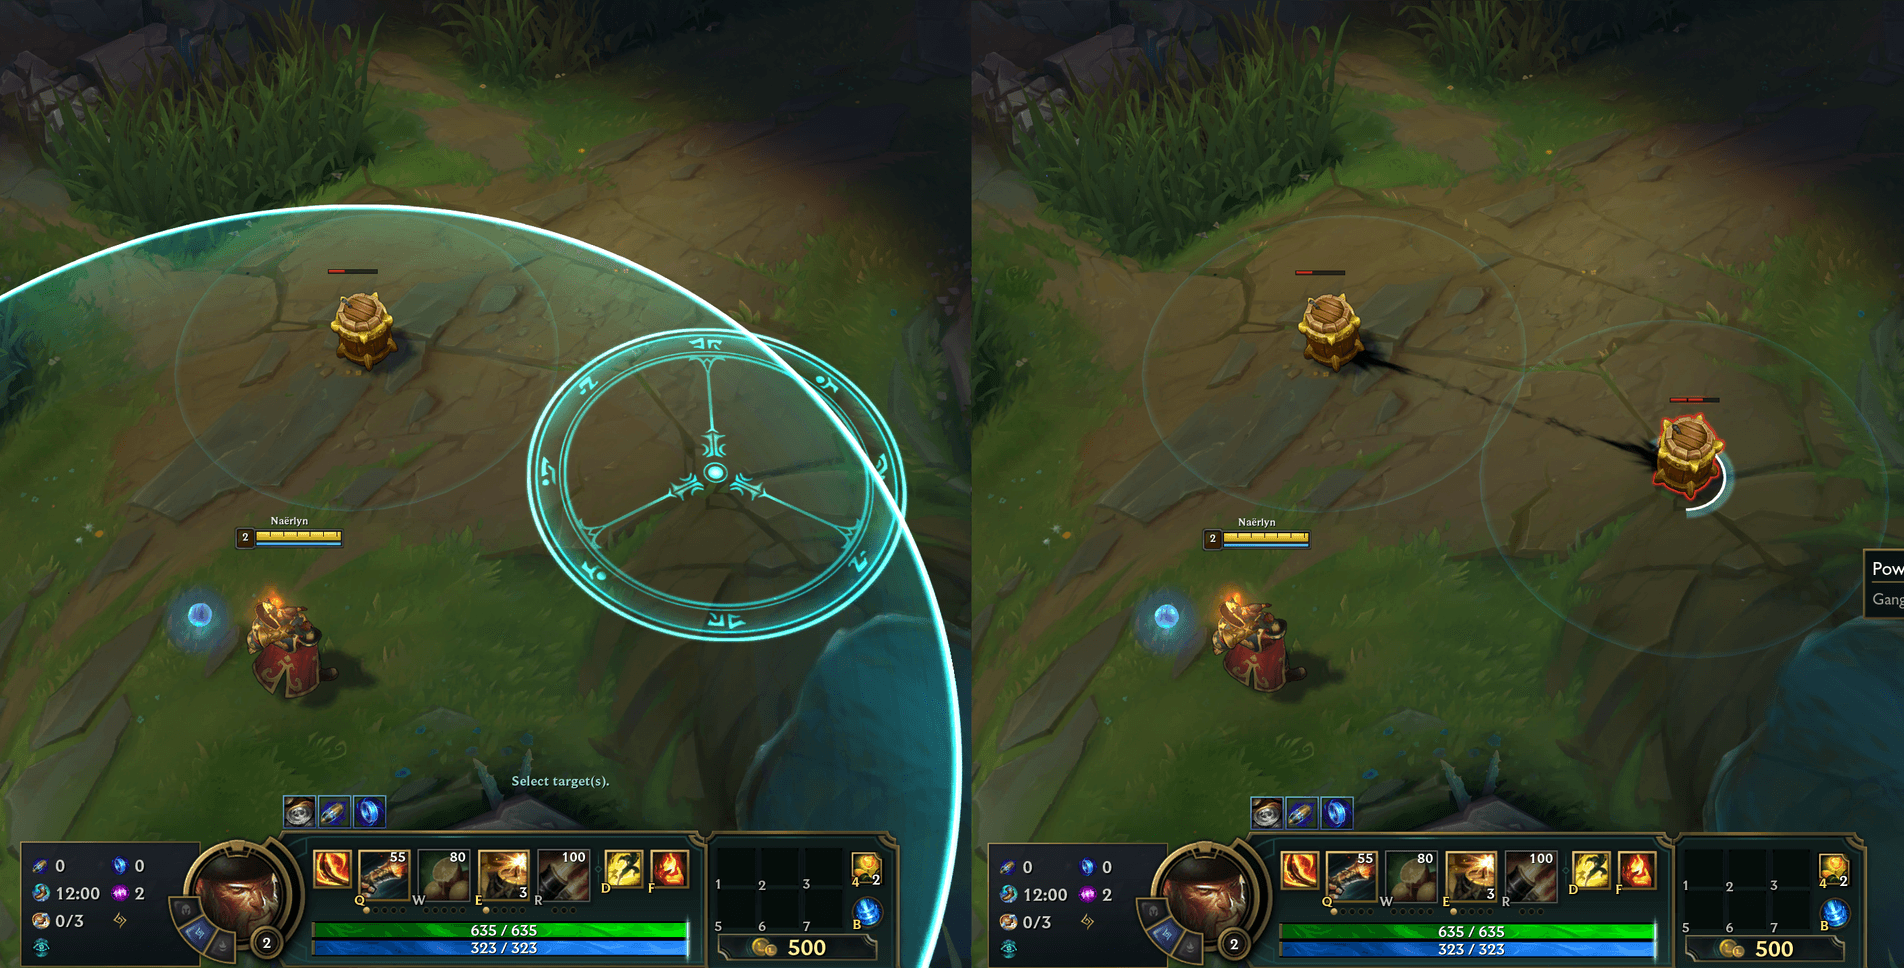 Learning how to place barrels in the top lane as gangplank